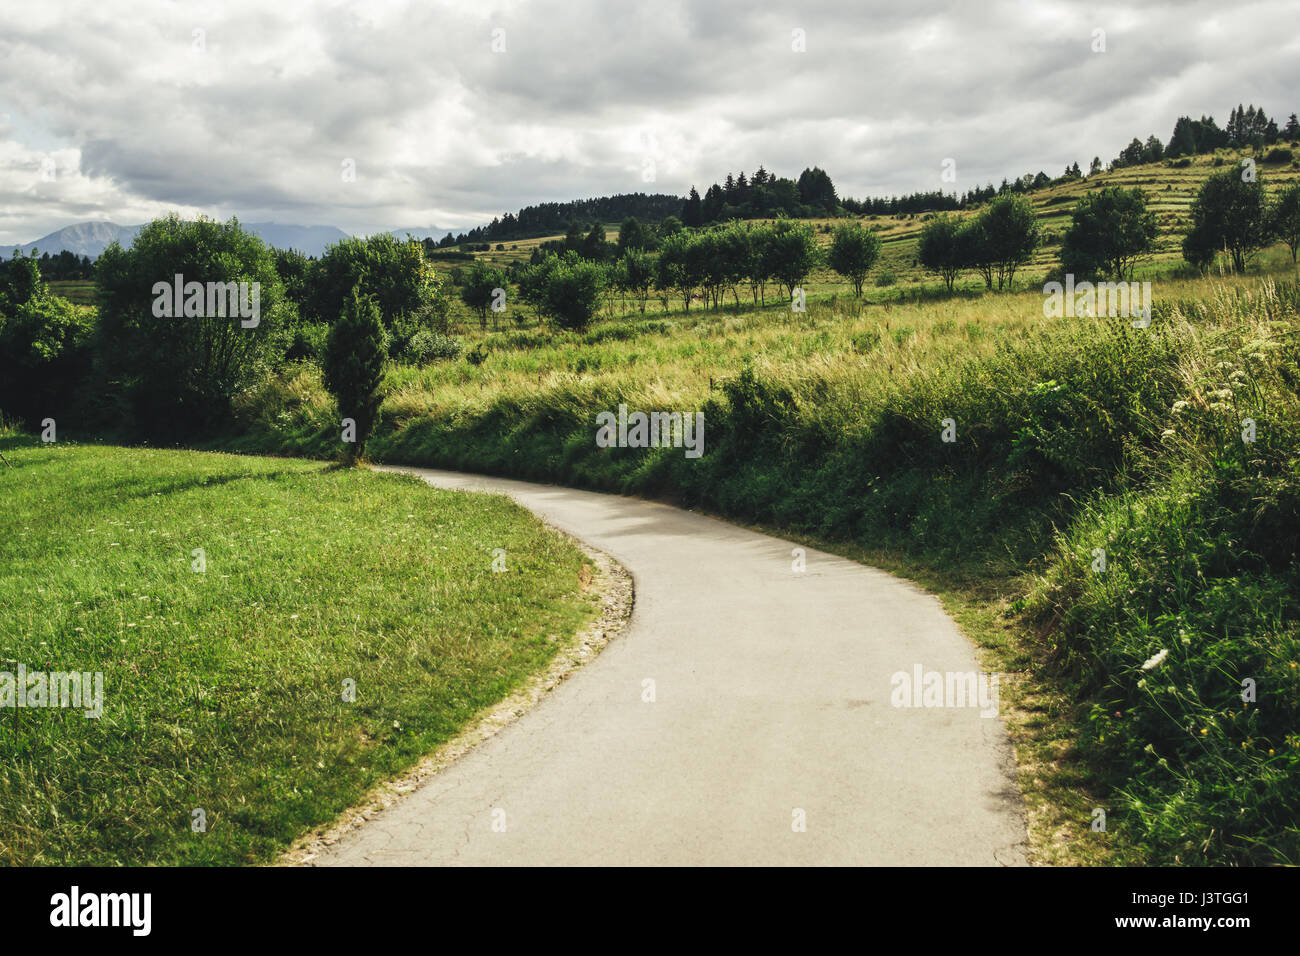 Small rural road in a green summer landscape Stock Photo